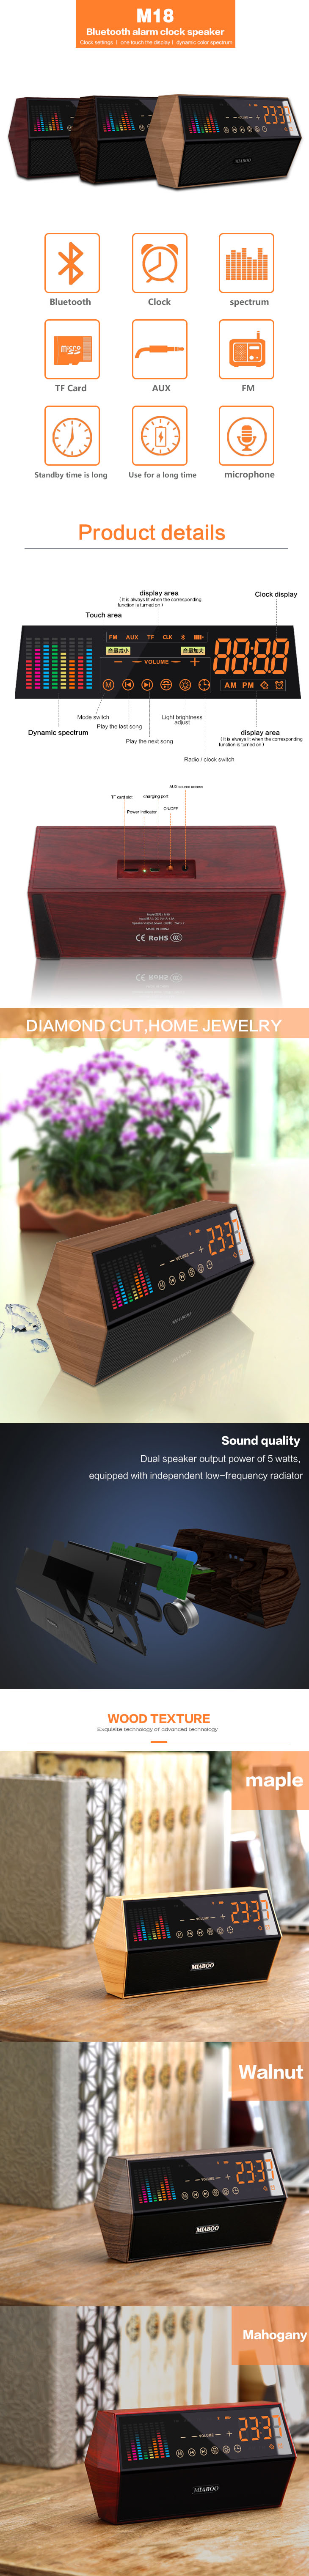 Bass SD Card Touch Lamp Wireless Speaker With FM Radio